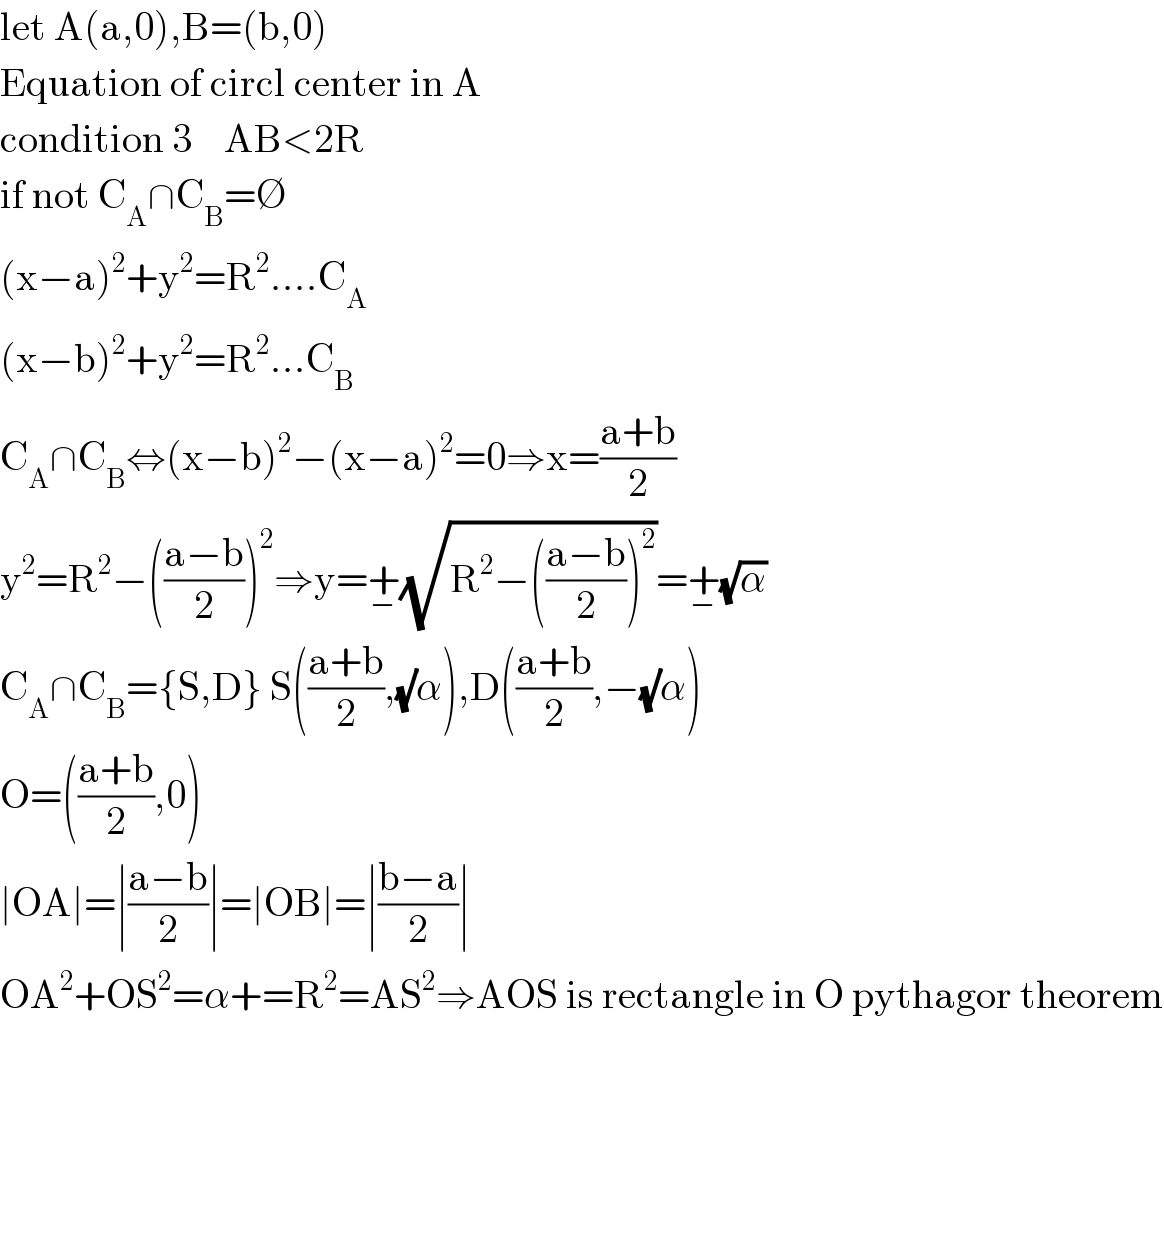 let A(a,0),B=(b,0)  Equation of circl center in A  condition 3    AB<2R  if not C_A ∩C_B =∅  (x−a)^2 +y^2 =R^2 ....C_A   (x−b)^2 +y^2 =R^2 ...C_B   C_A ∩C_B ⇔(x−b)^2 −(x−a)^2 =0⇒x=((a+b)/2)  y^2 =R^2 −(((a−b)/2))^2 ⇒y=+_− (√(R^2 −(((a−b)/2))^2 ))=+_− (√α)  C_A ∩C_B ={S,D} S(((a+b)/2),(√)α),D(((a+b)/2),−(√)α)  O=(((a+b)/2),0)  ∣OA∣=∣((a−b)/2)∣=∣OB∣=∣((b−a)/2)∣  OA^2 +OS^2 =α+=R^2 =AS^2 ⇒AOS is rectangle in O pythagor theorem          